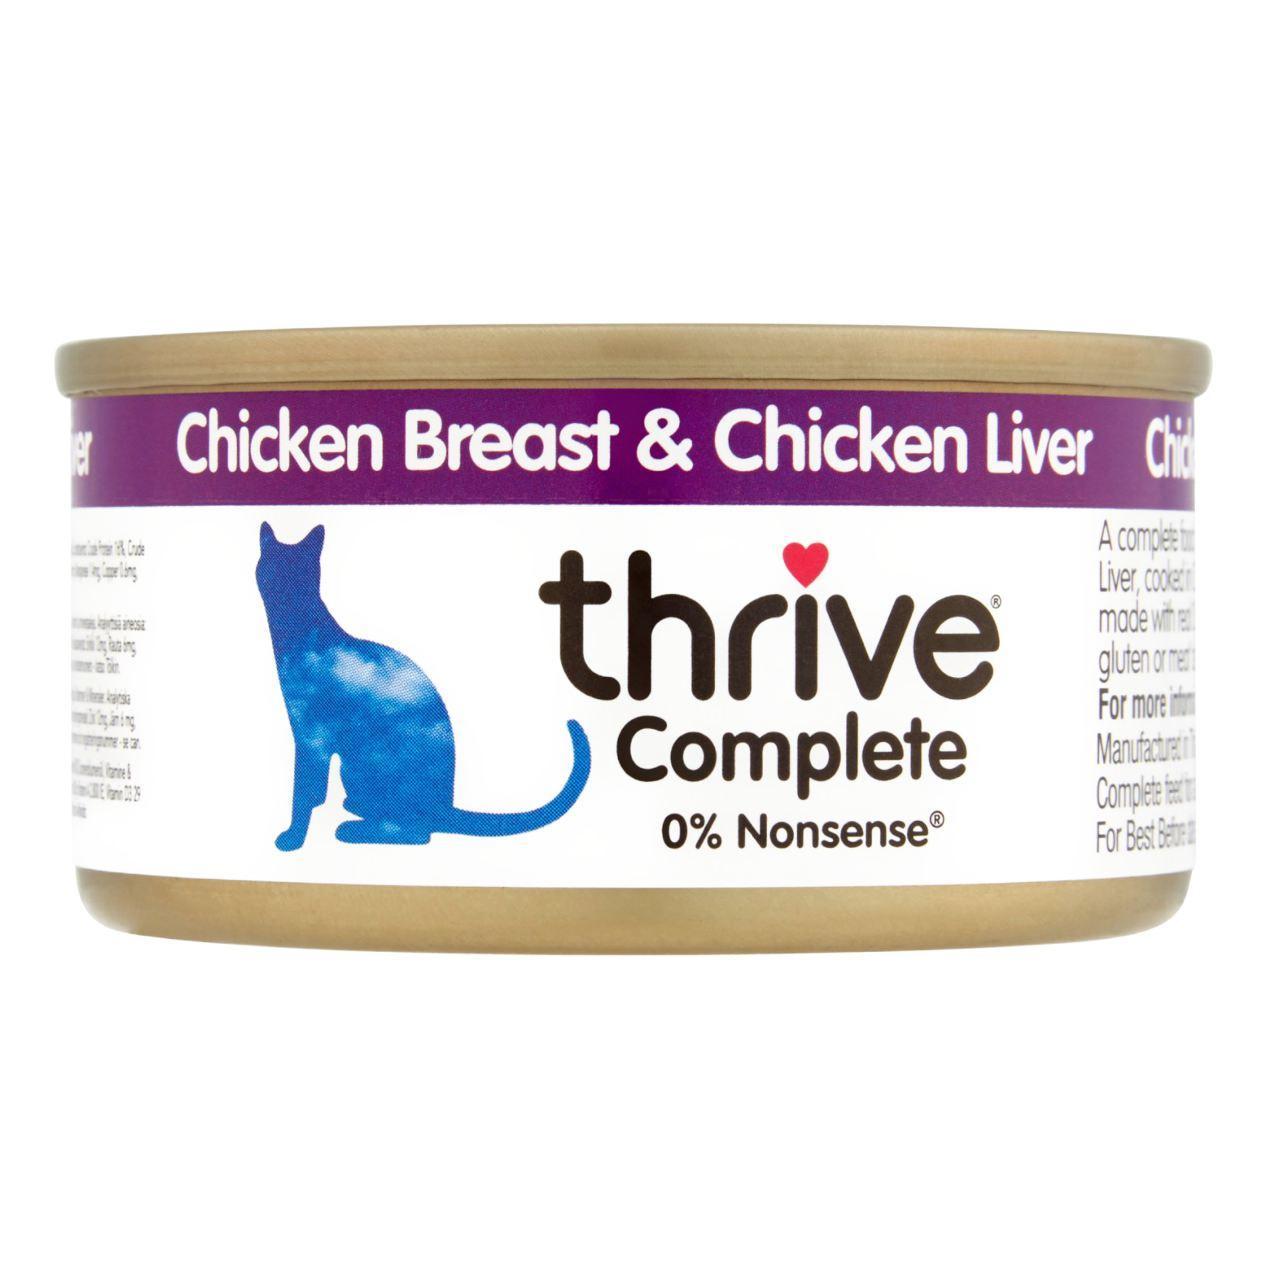 An image of Thrive Complete Chicken Breast & Chicken Liver Cat Food